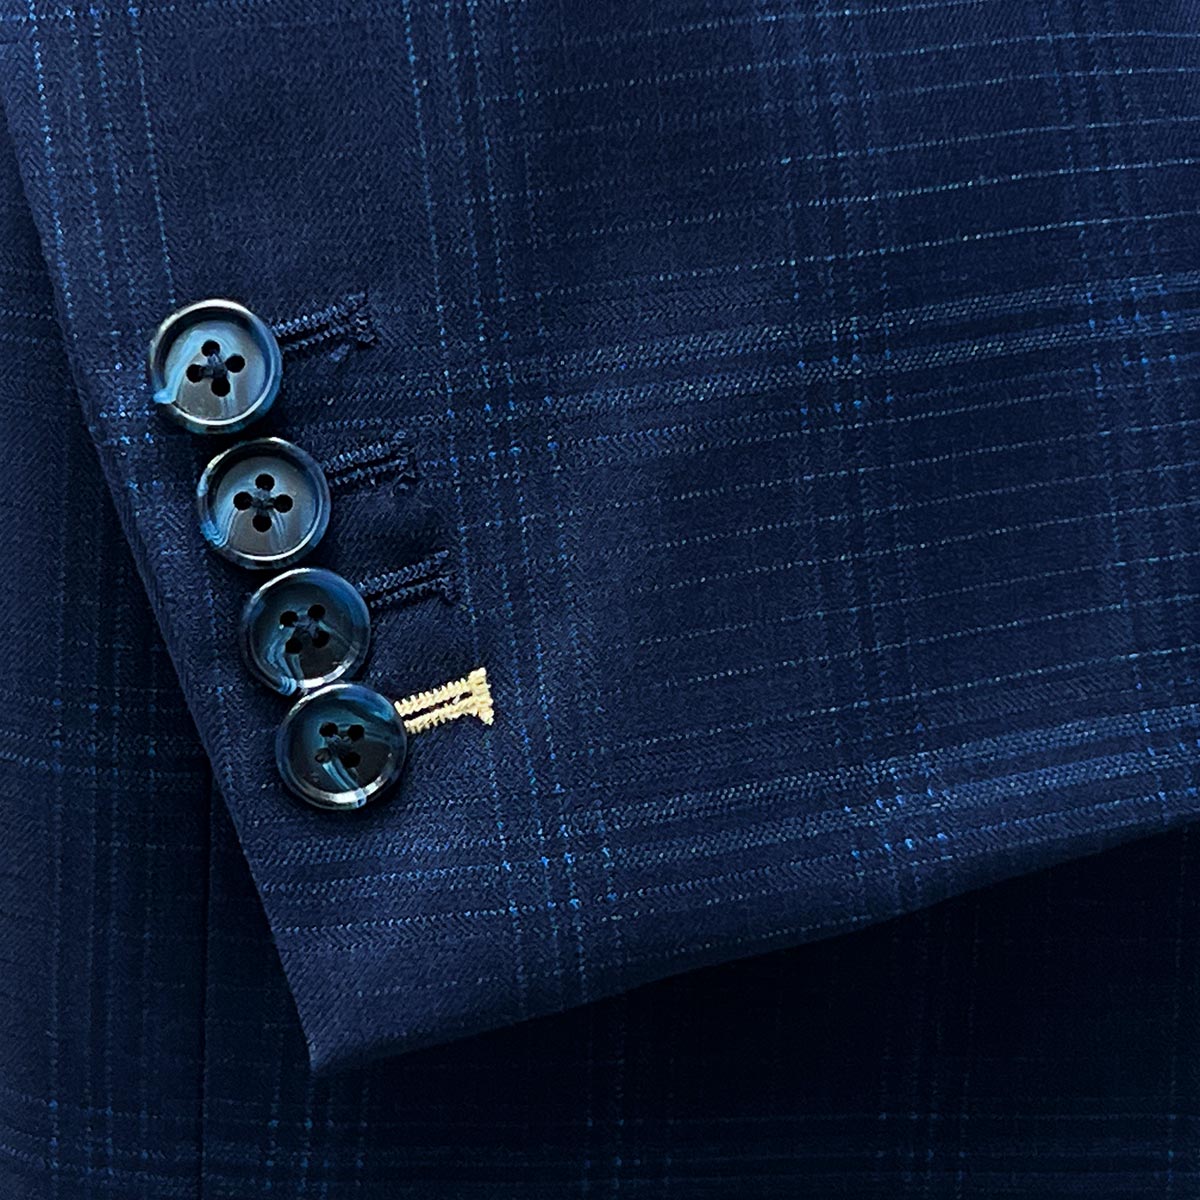 Functional sleeve buttonholes allowing for precise sleeve length adjustment on a midnight blue windowpane suit.